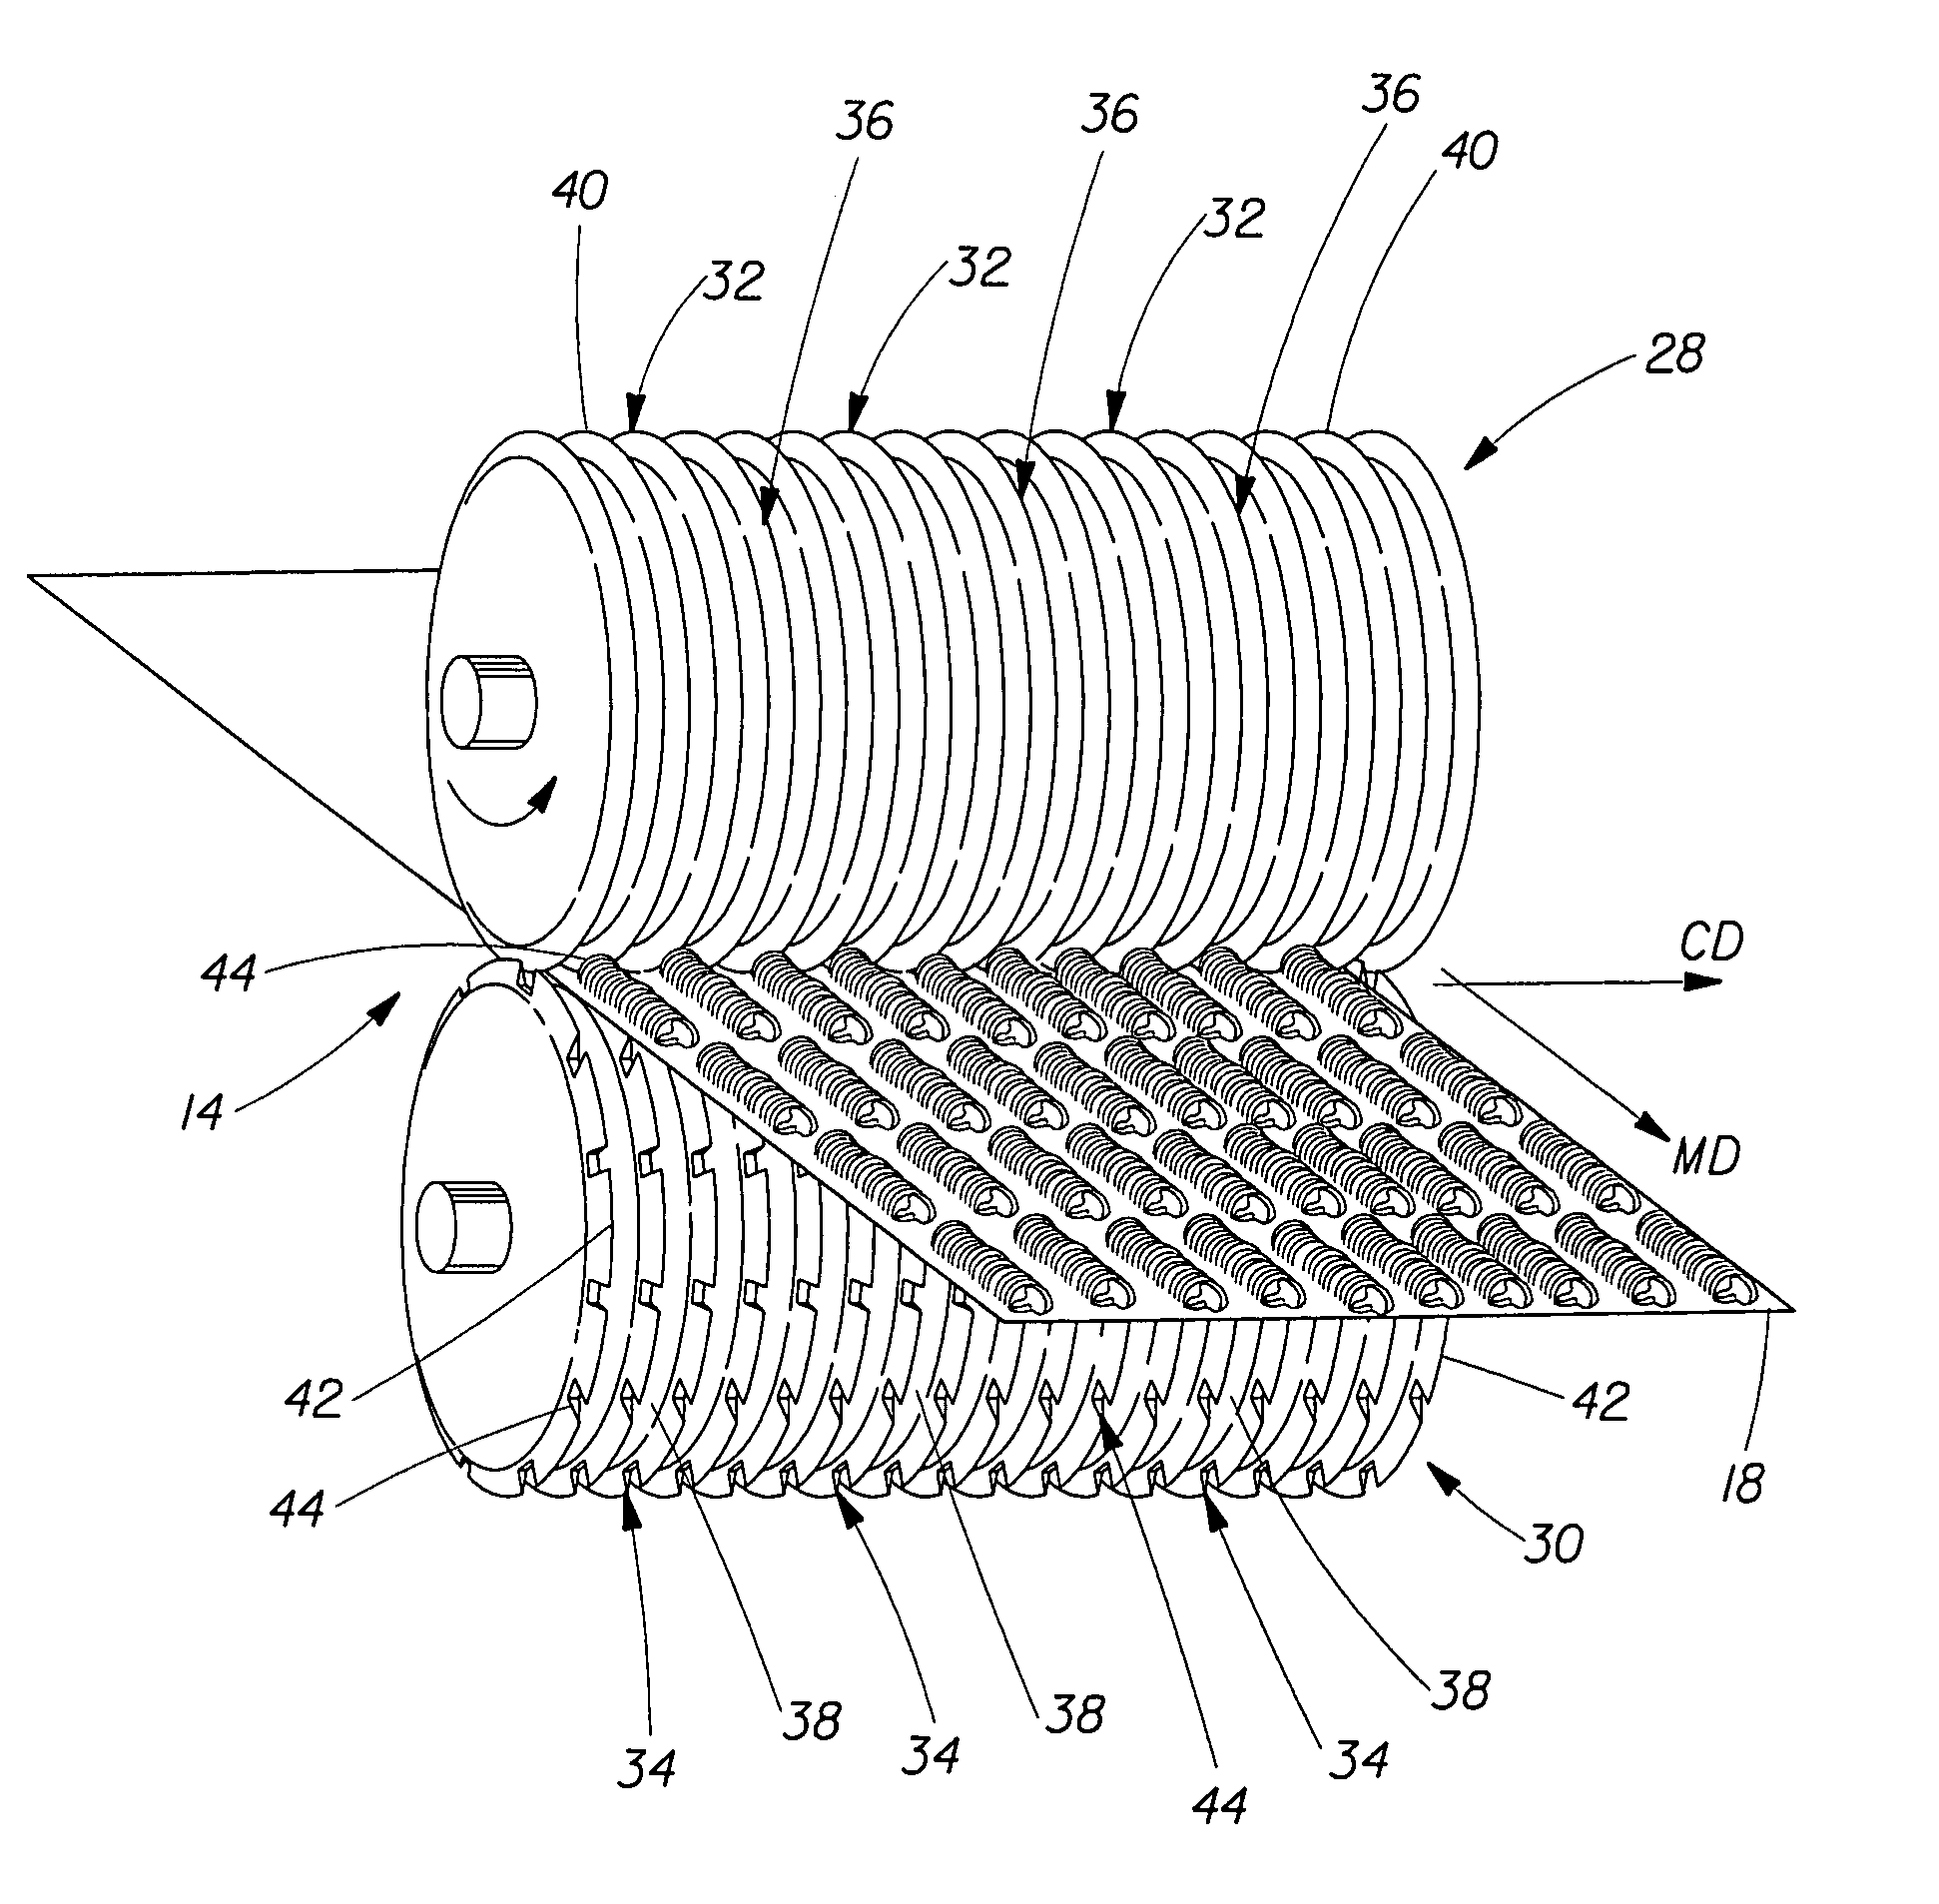 Apparatus and process for producing a web substrate having indicia disposed thereon and elastic-like behavior imparted thereto